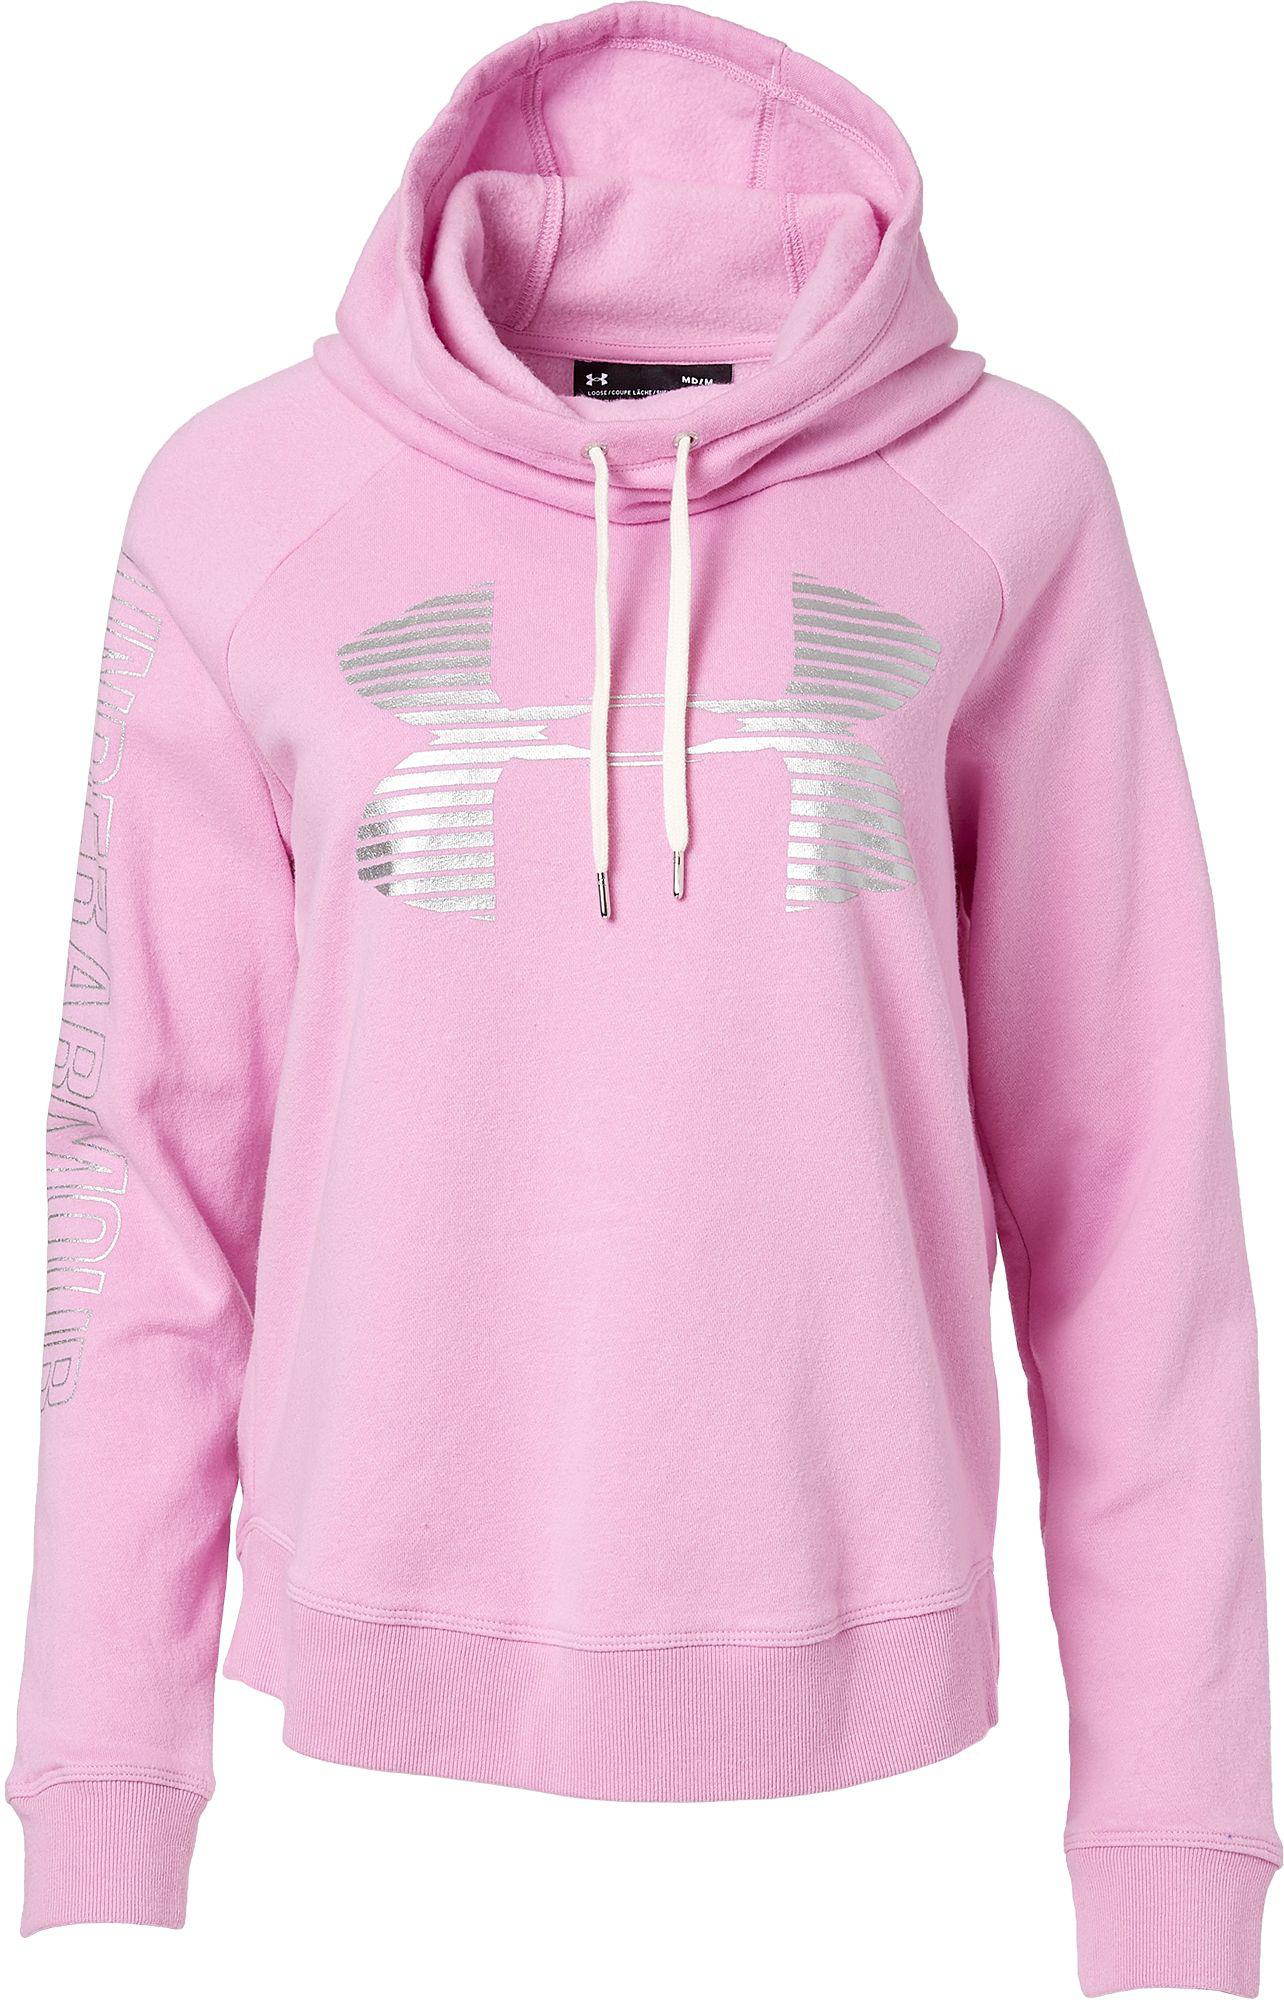 pink and grey under armour hoodie